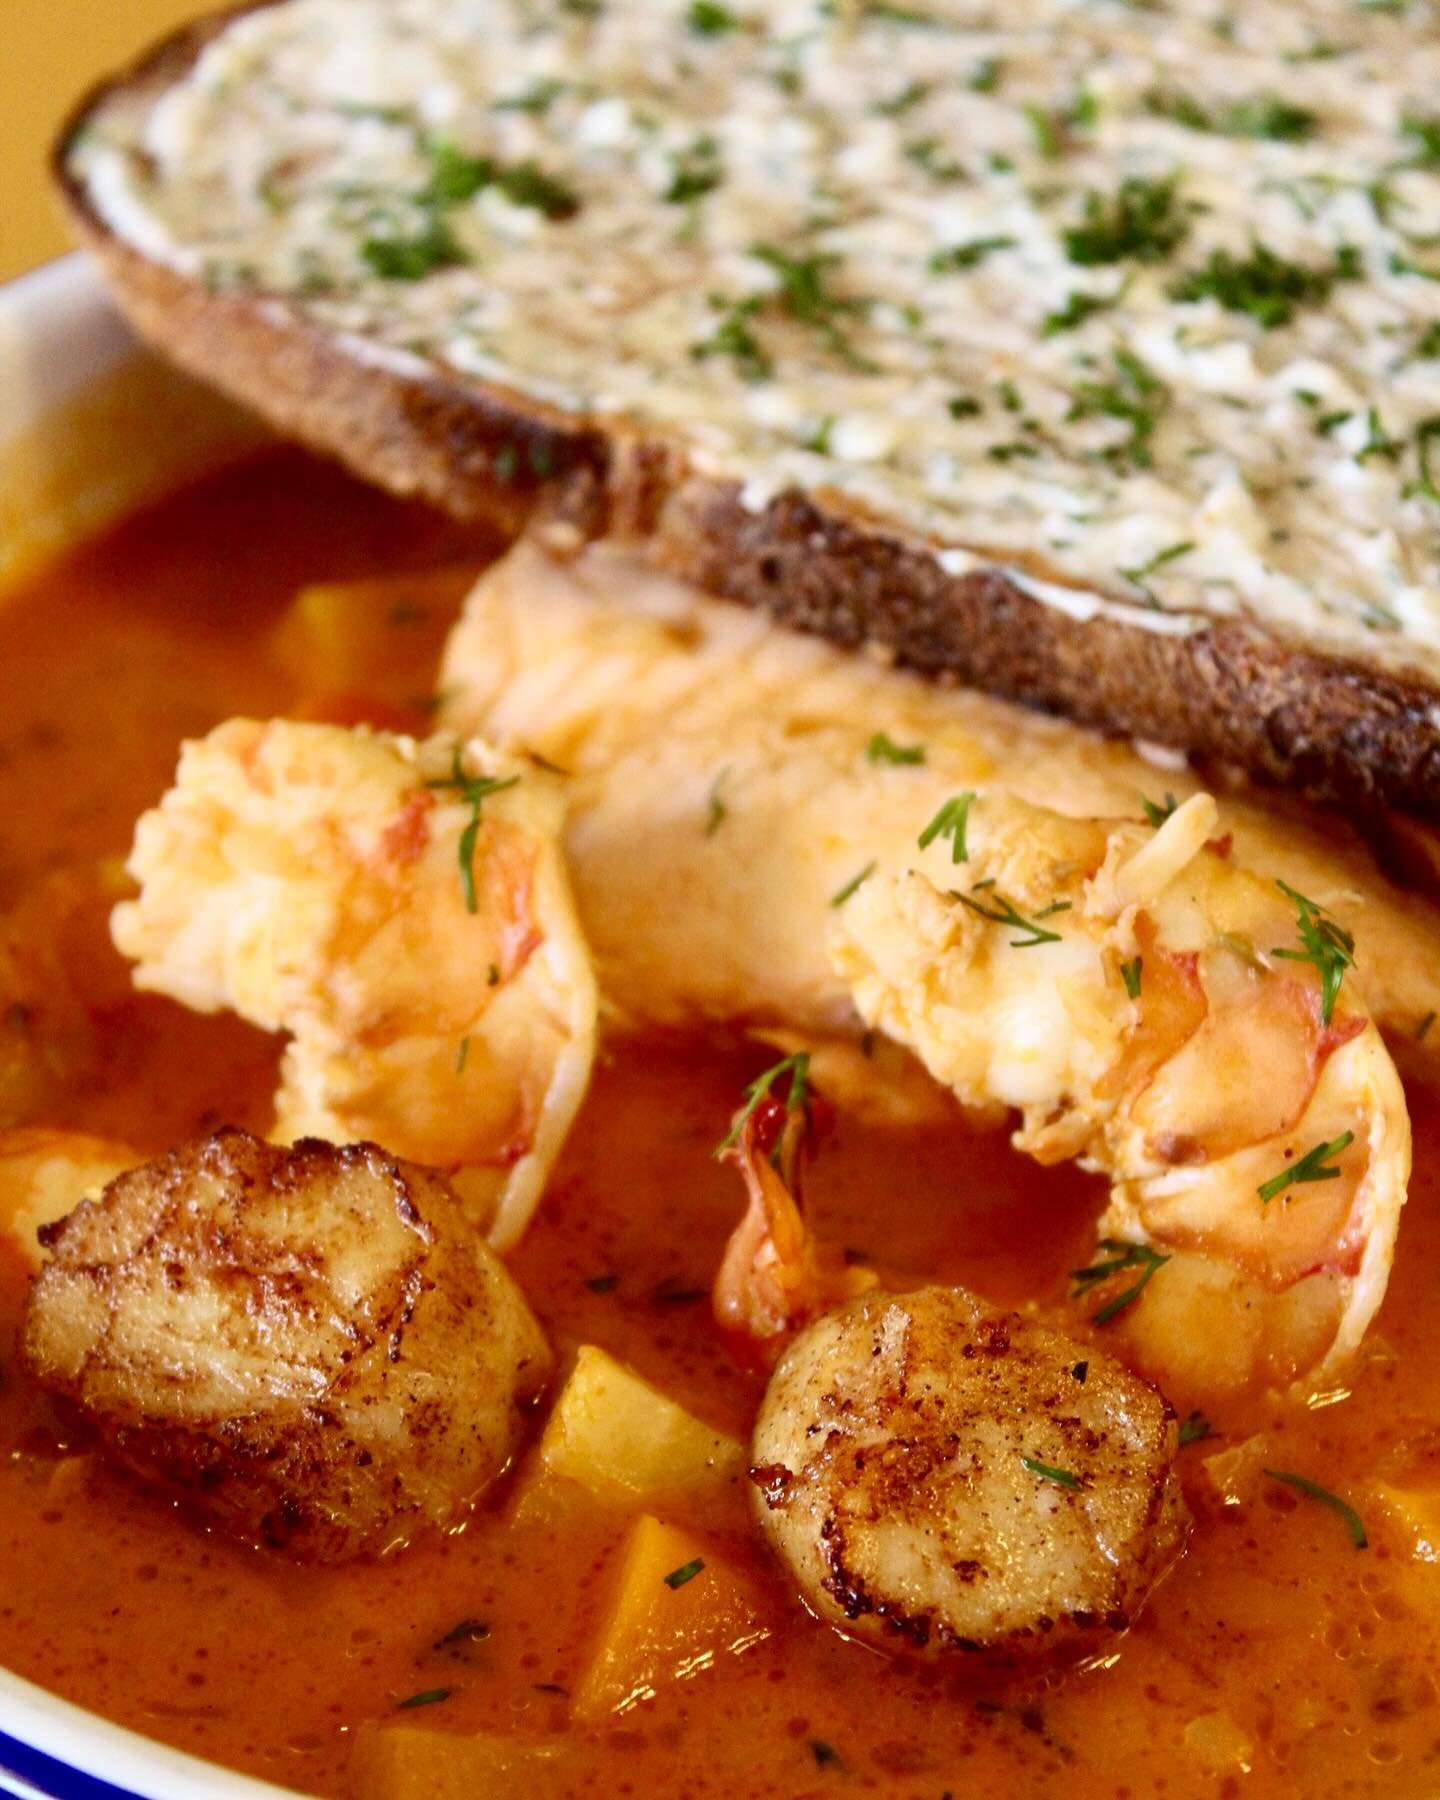 New dish Alert! Swedish style fish soup, with salmon, scallops and prawns served with homemade aioli on toast 🐟is a must try 😋